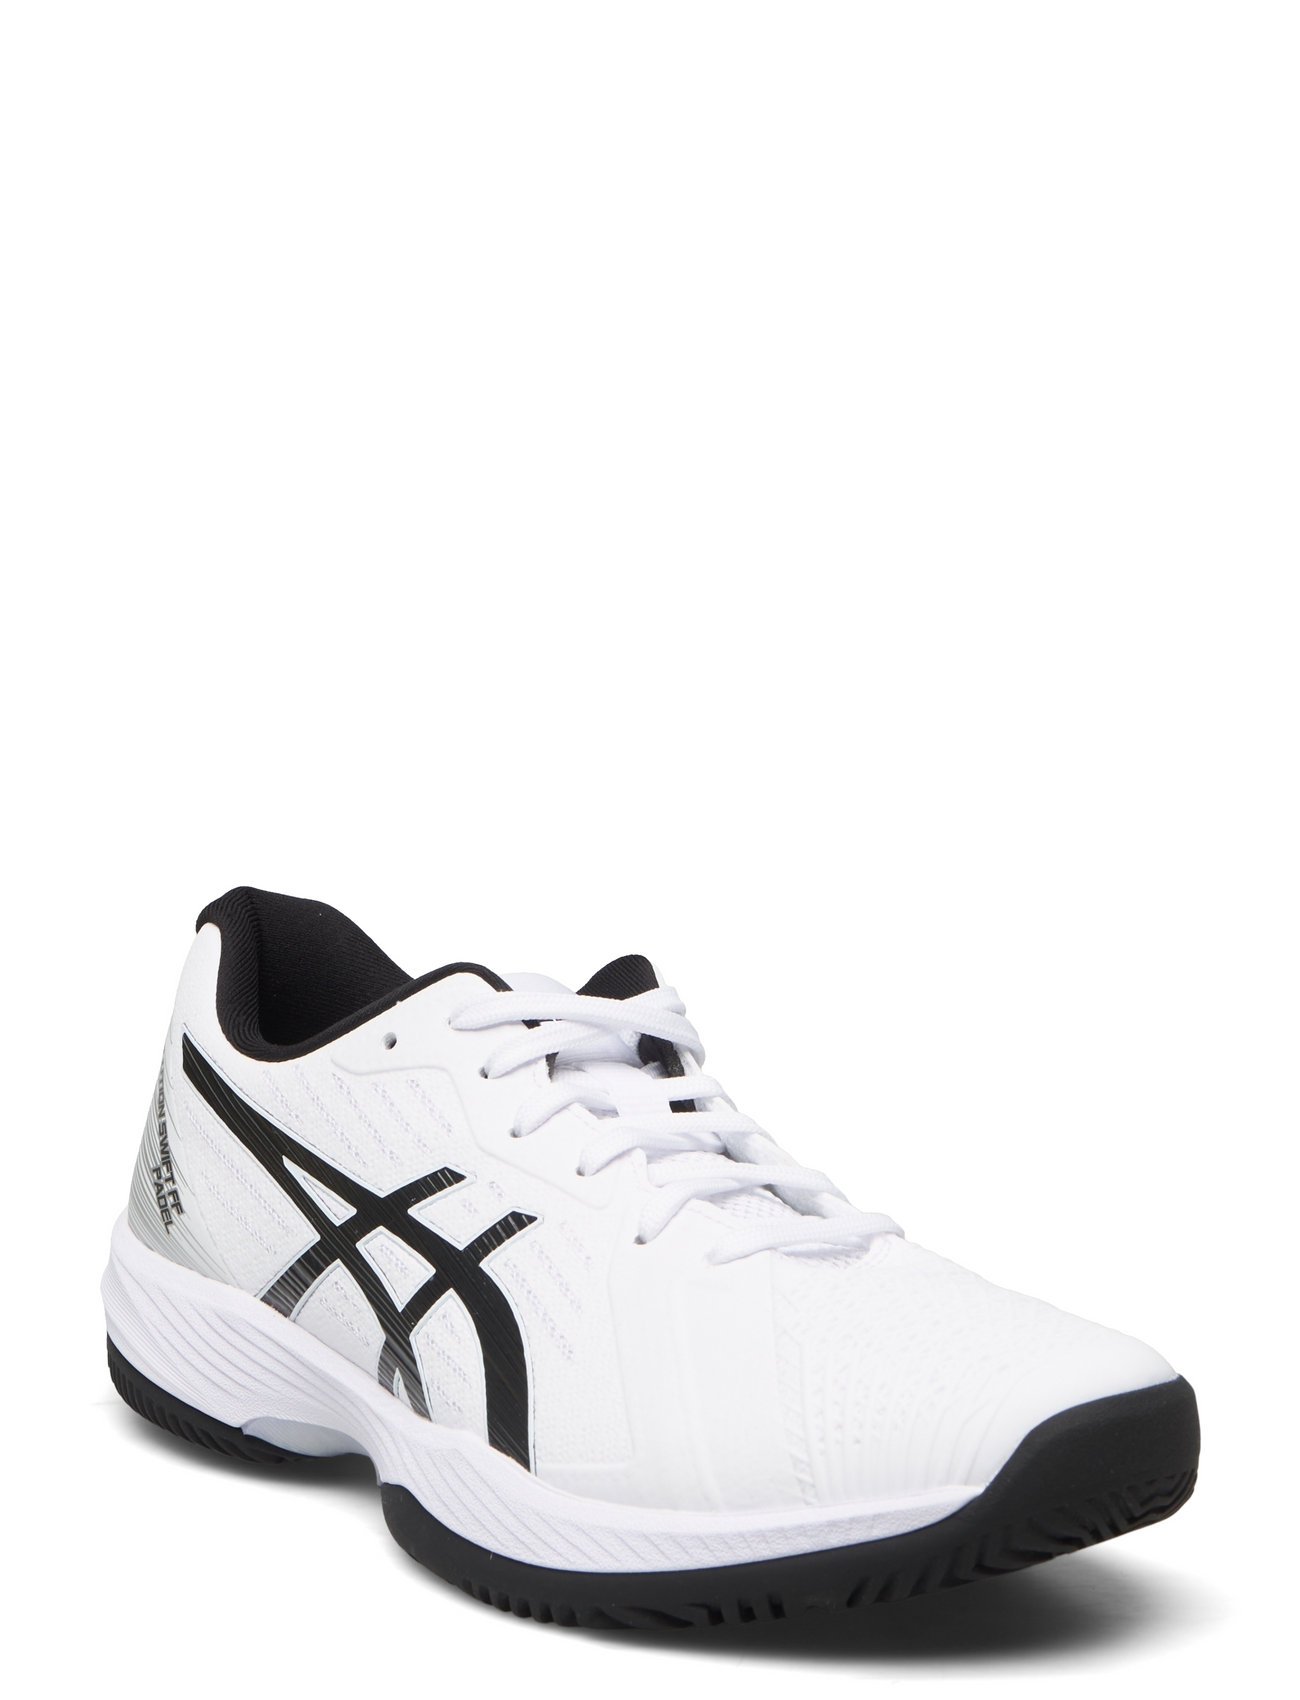 Solution Swift Ff Padel Sport Sport Shoes Racketsports Shoes Tennis Shoes White Asics